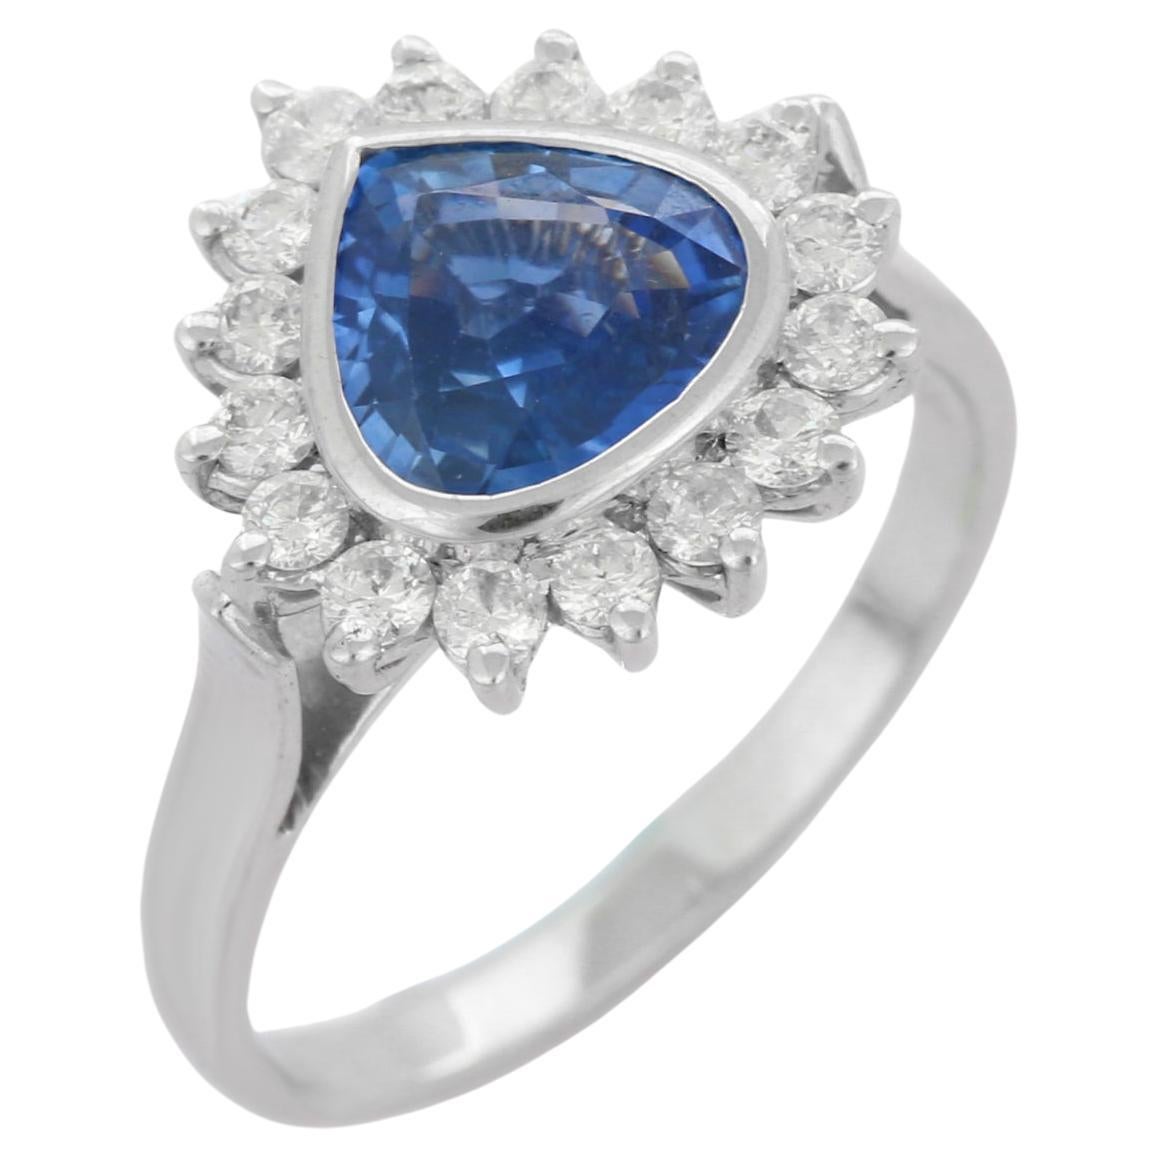 For Sale:  2.05 ct Blue Sapphire and Diamond Halo Engagement Ring in 18K White Gold